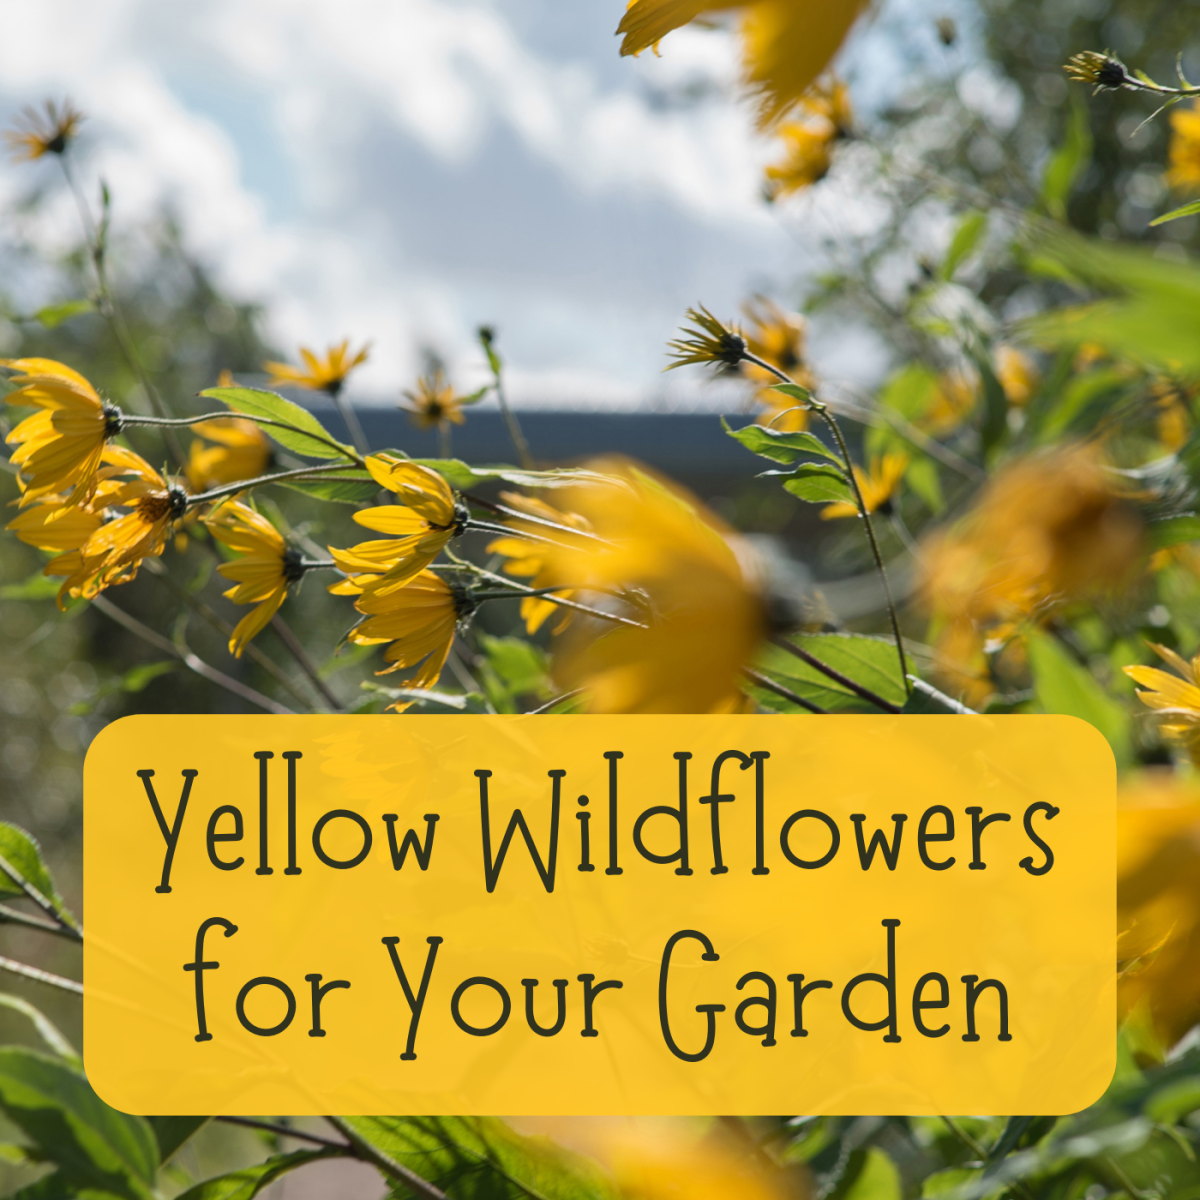 If you want to incorporate more native plants into your flower garden, try these sunny yellow wildflowers.